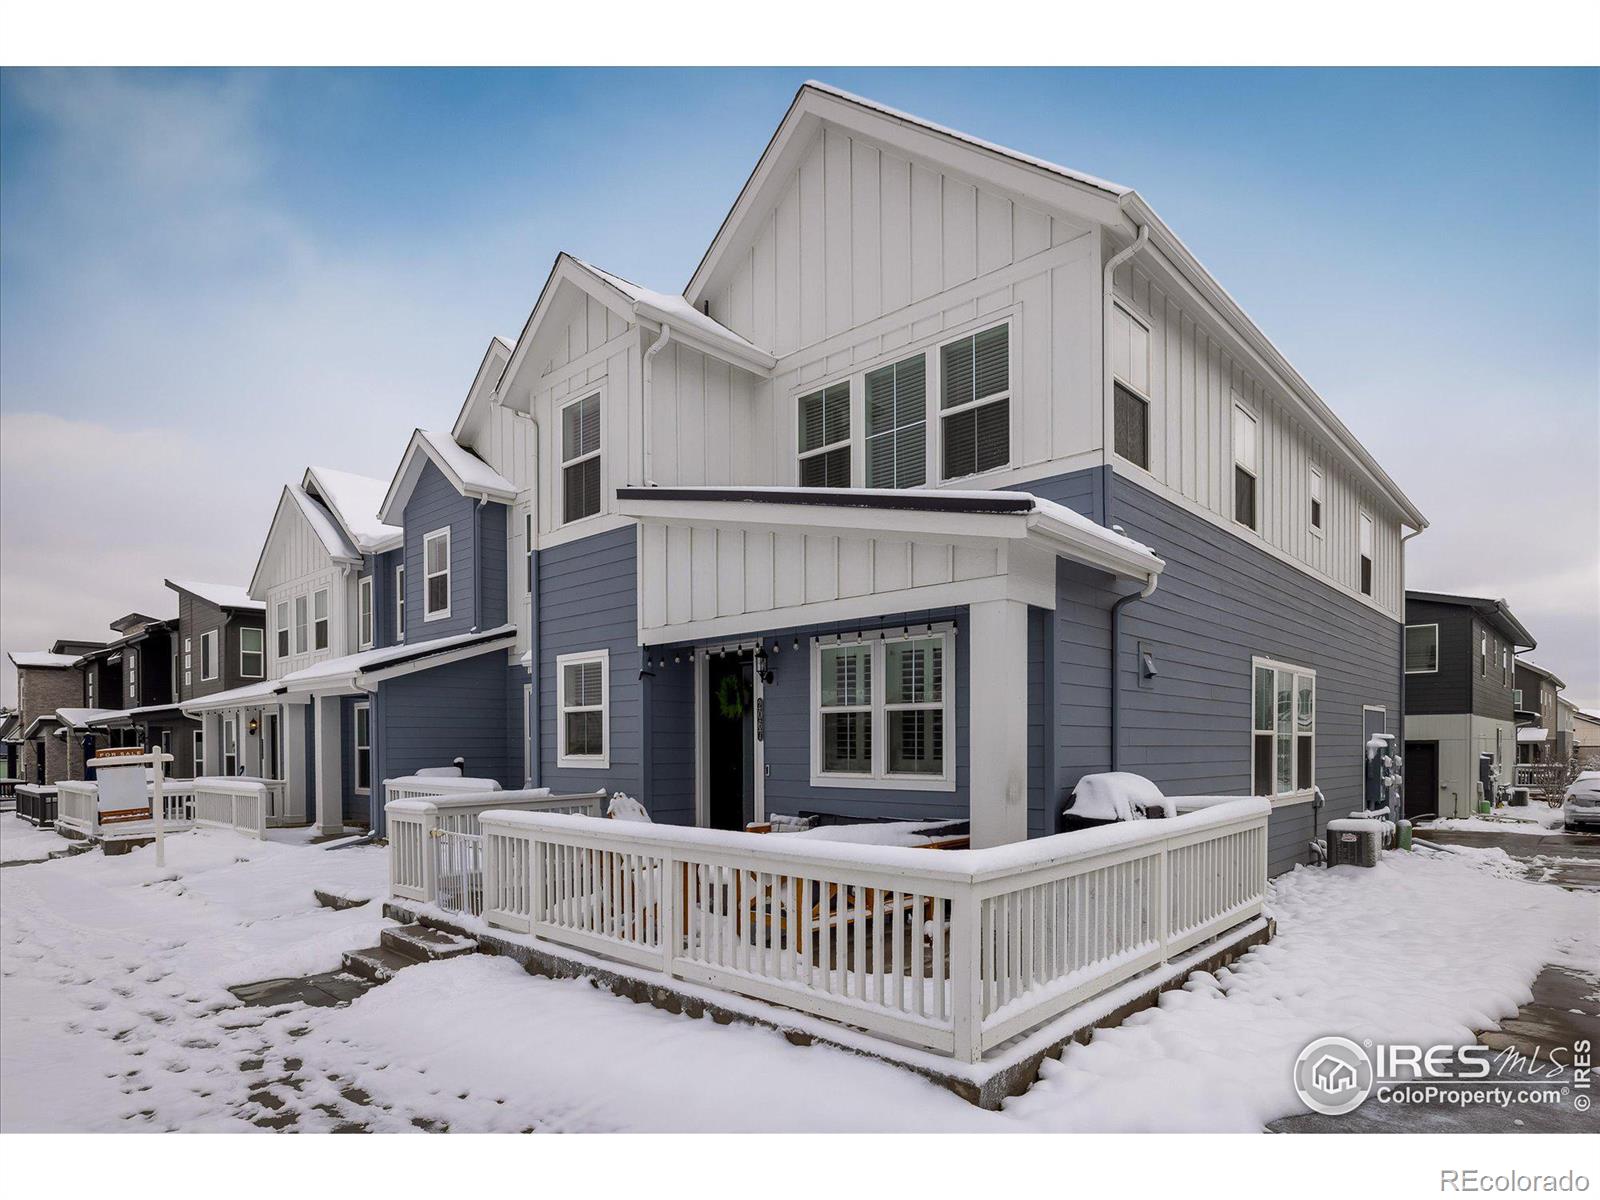 CMA Image for 2179 s dudley street,Lakewood, Colorado